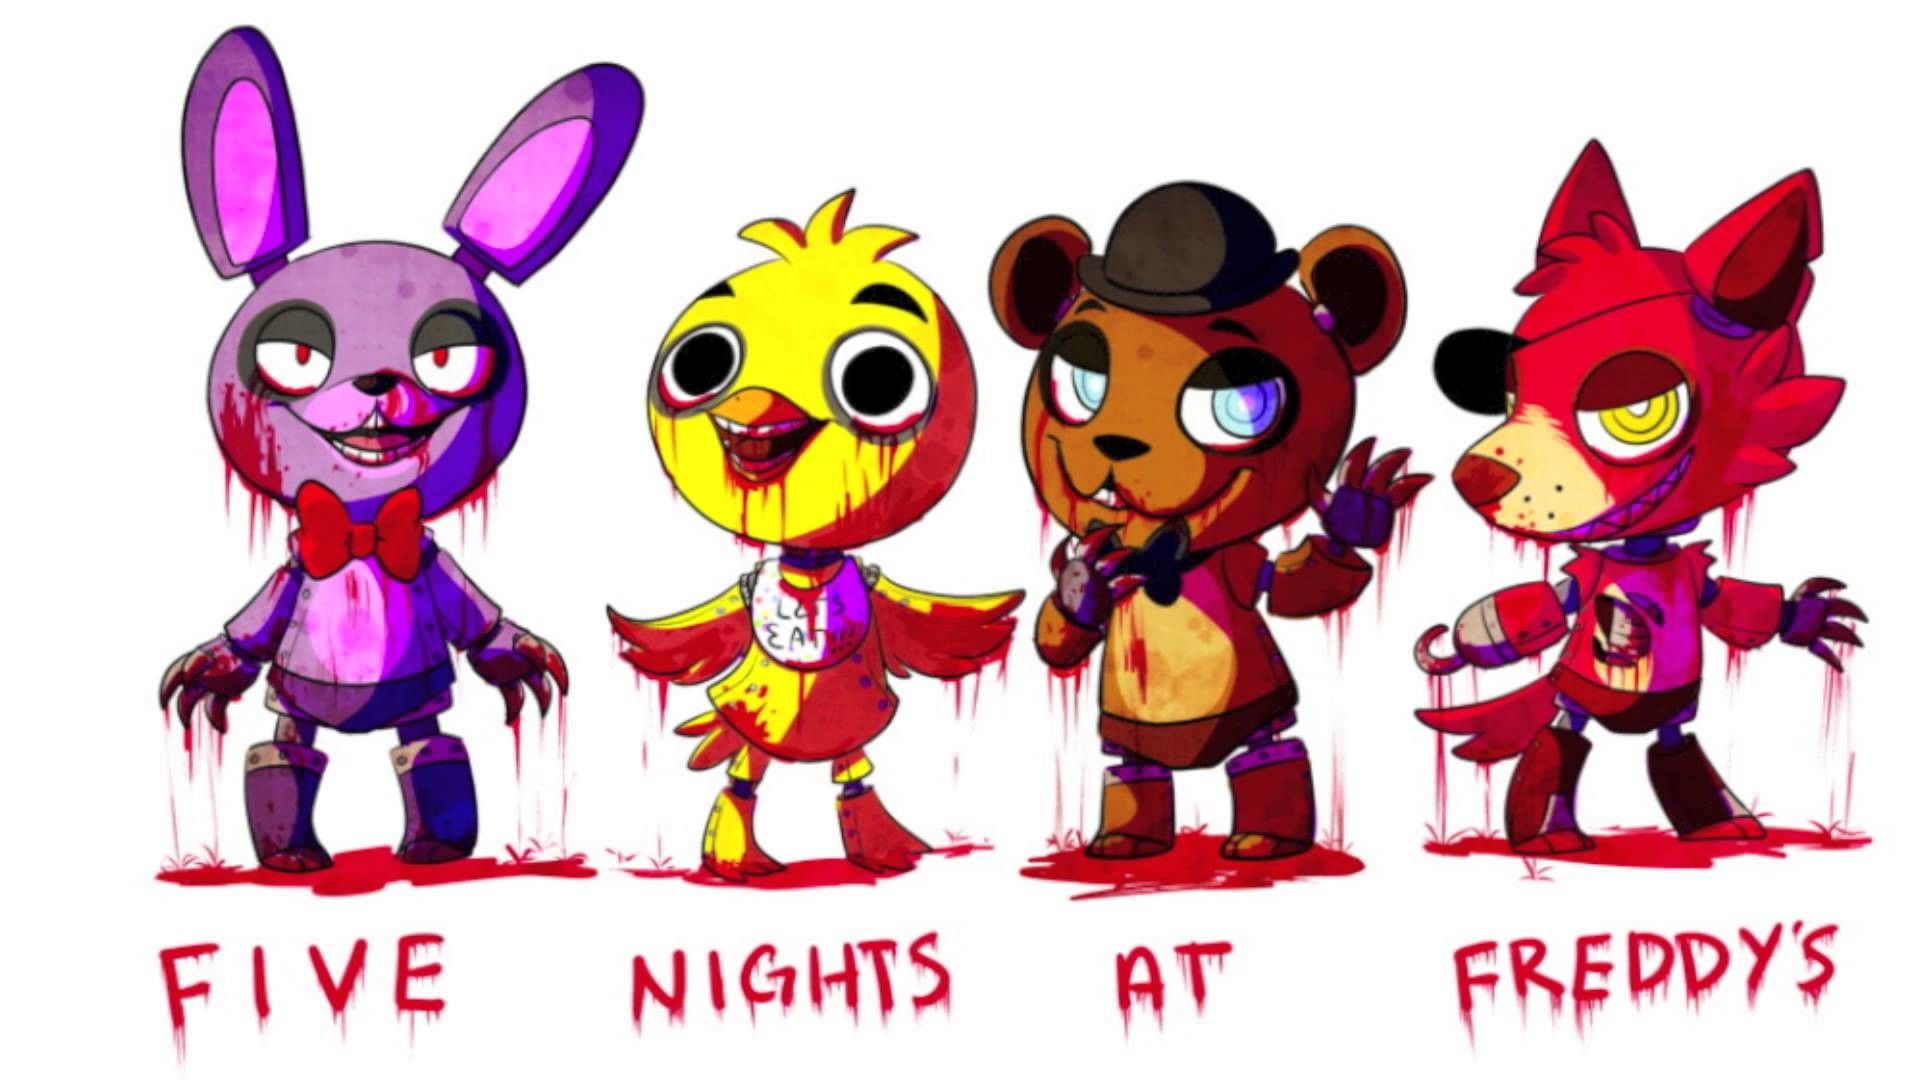 Cute Fnaf Wallpapers posted by Zoey Johnson.